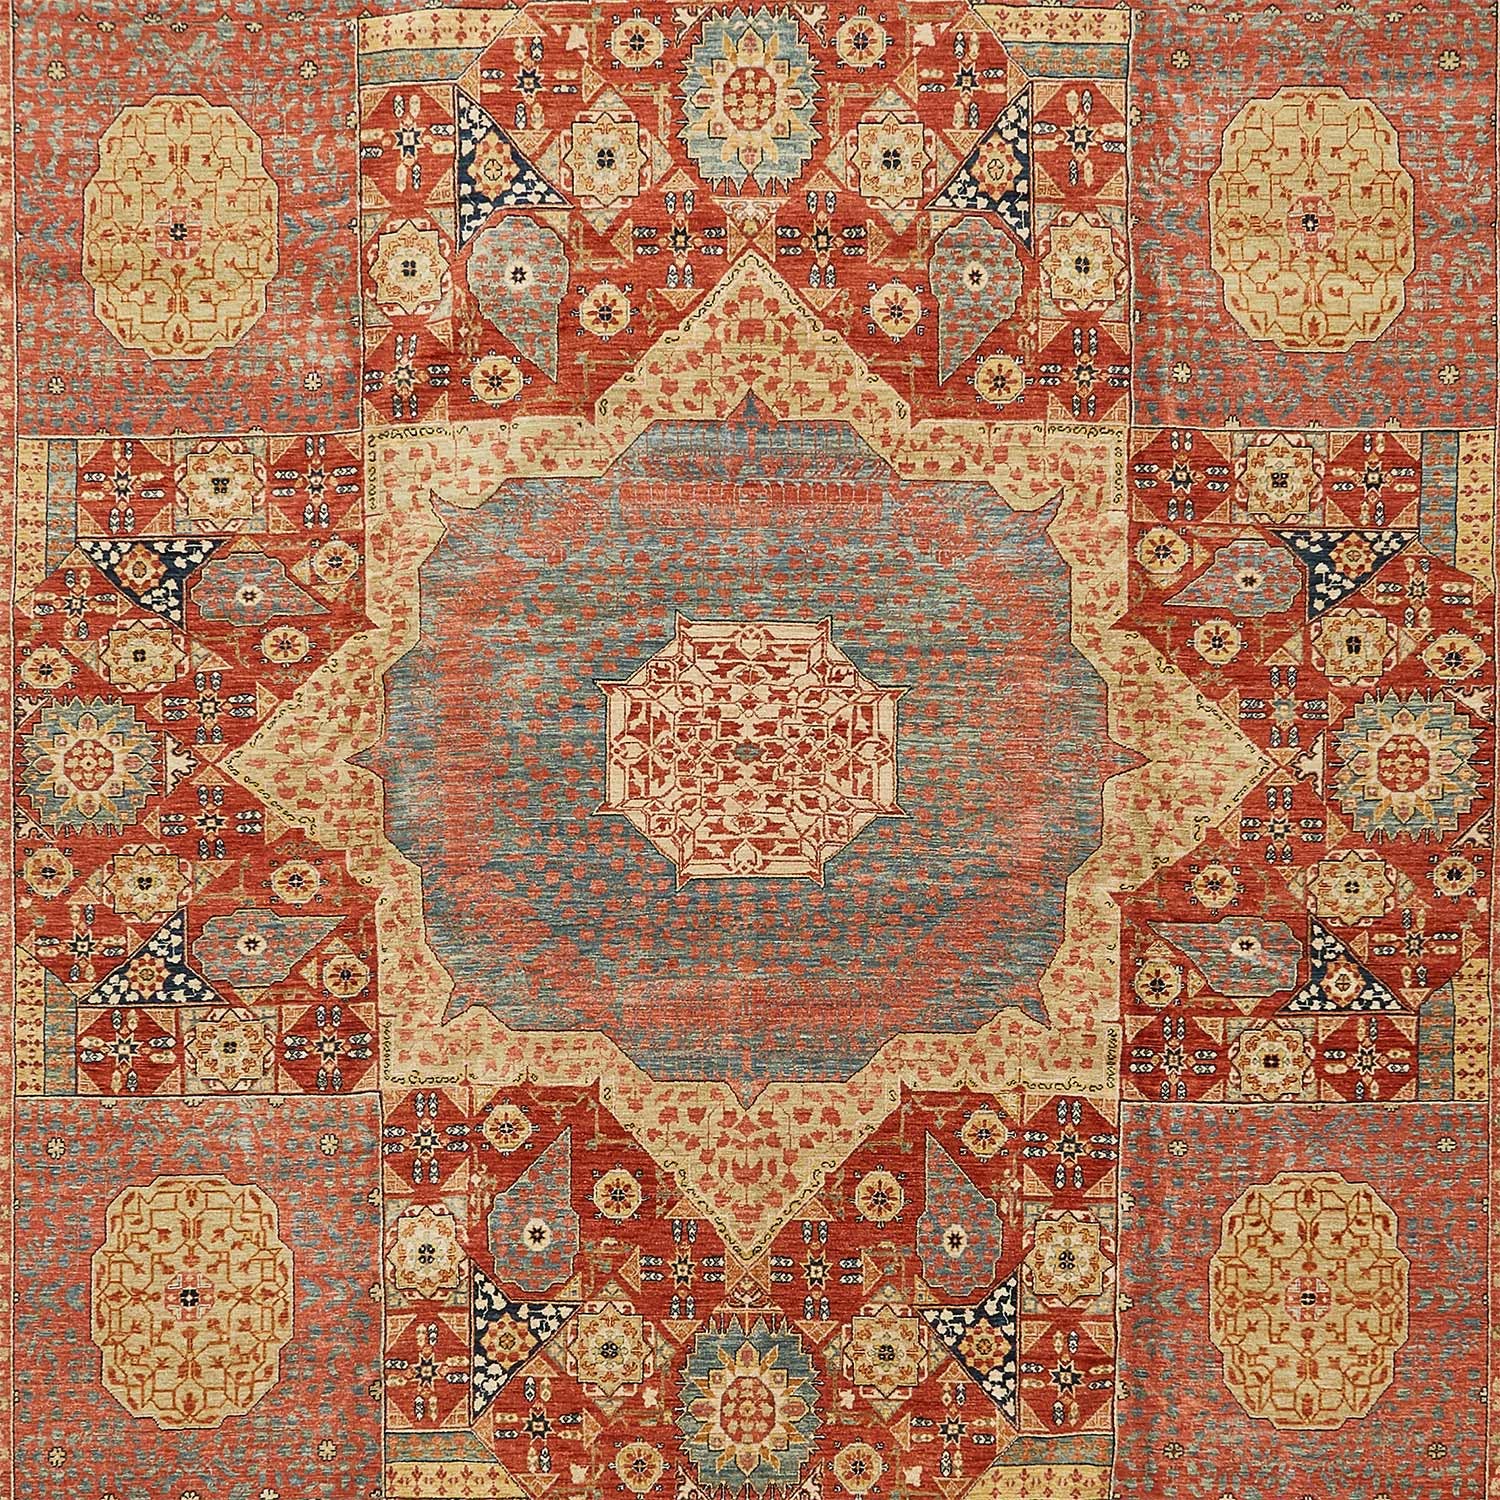 Exquisite symmetrical oriental carpet with intricate patterns and vibrant colors.